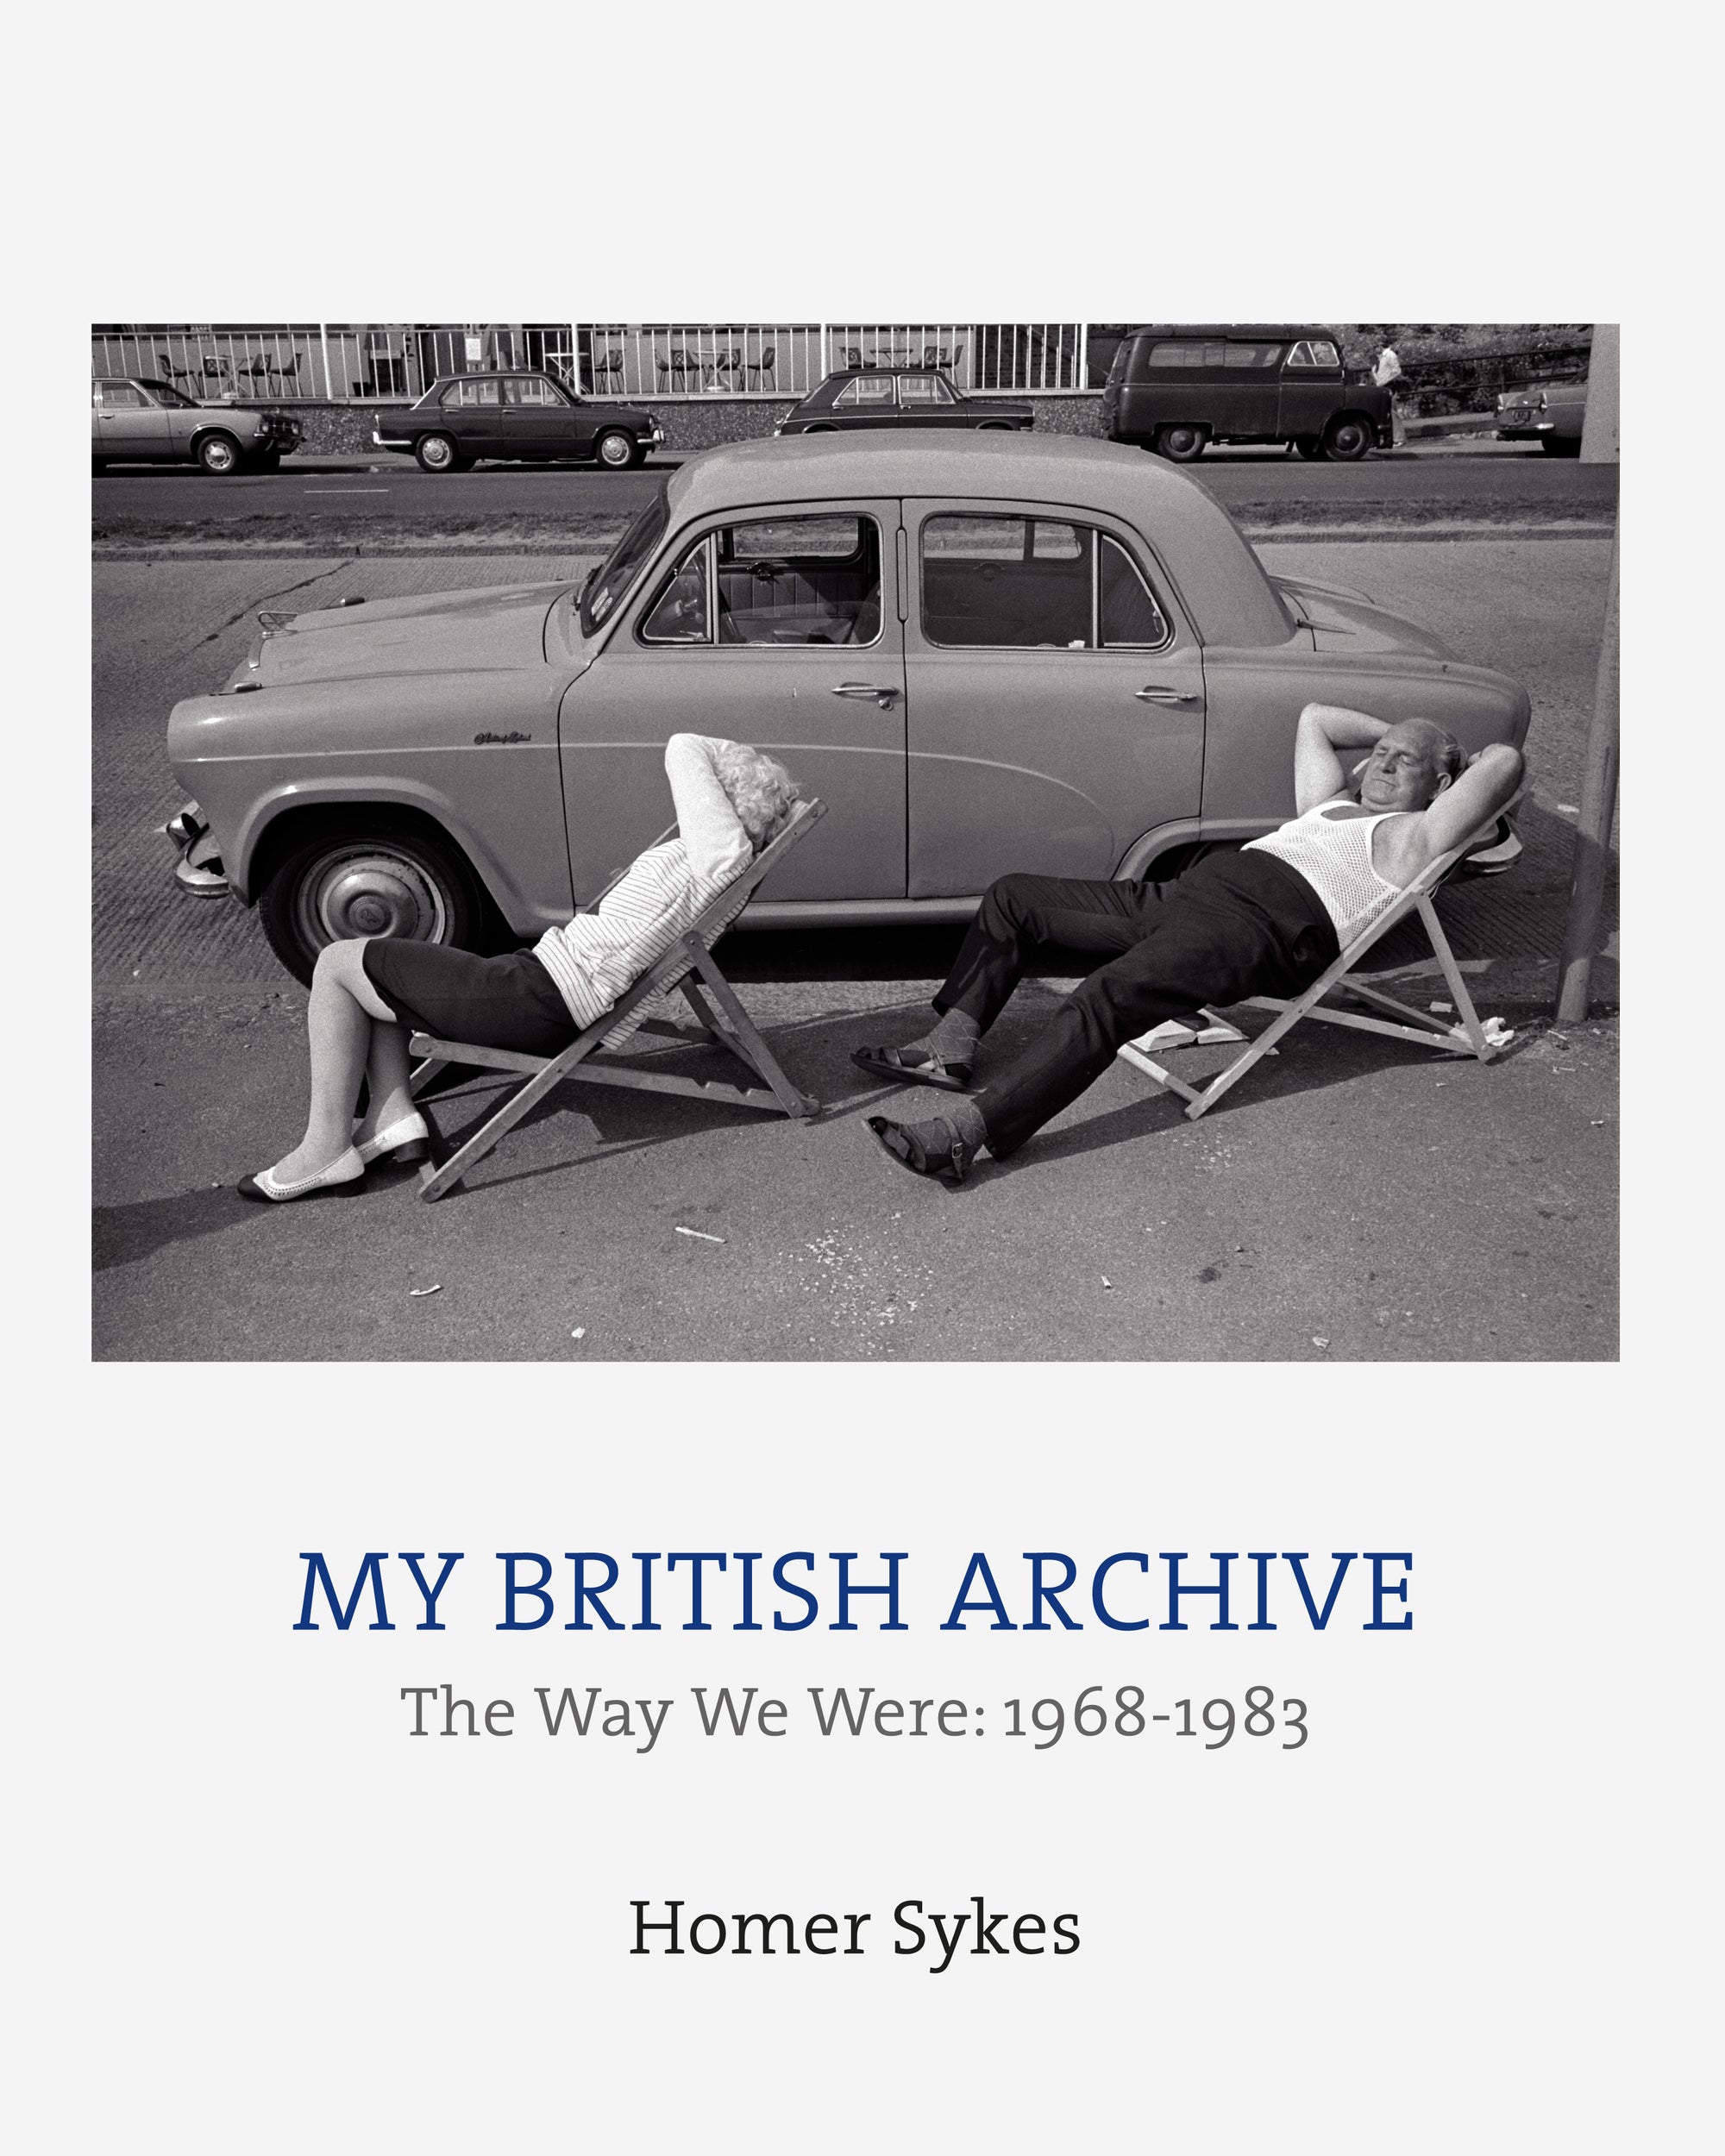 HOMER SYKES: My British Archive: The Way We Were 1968-1983